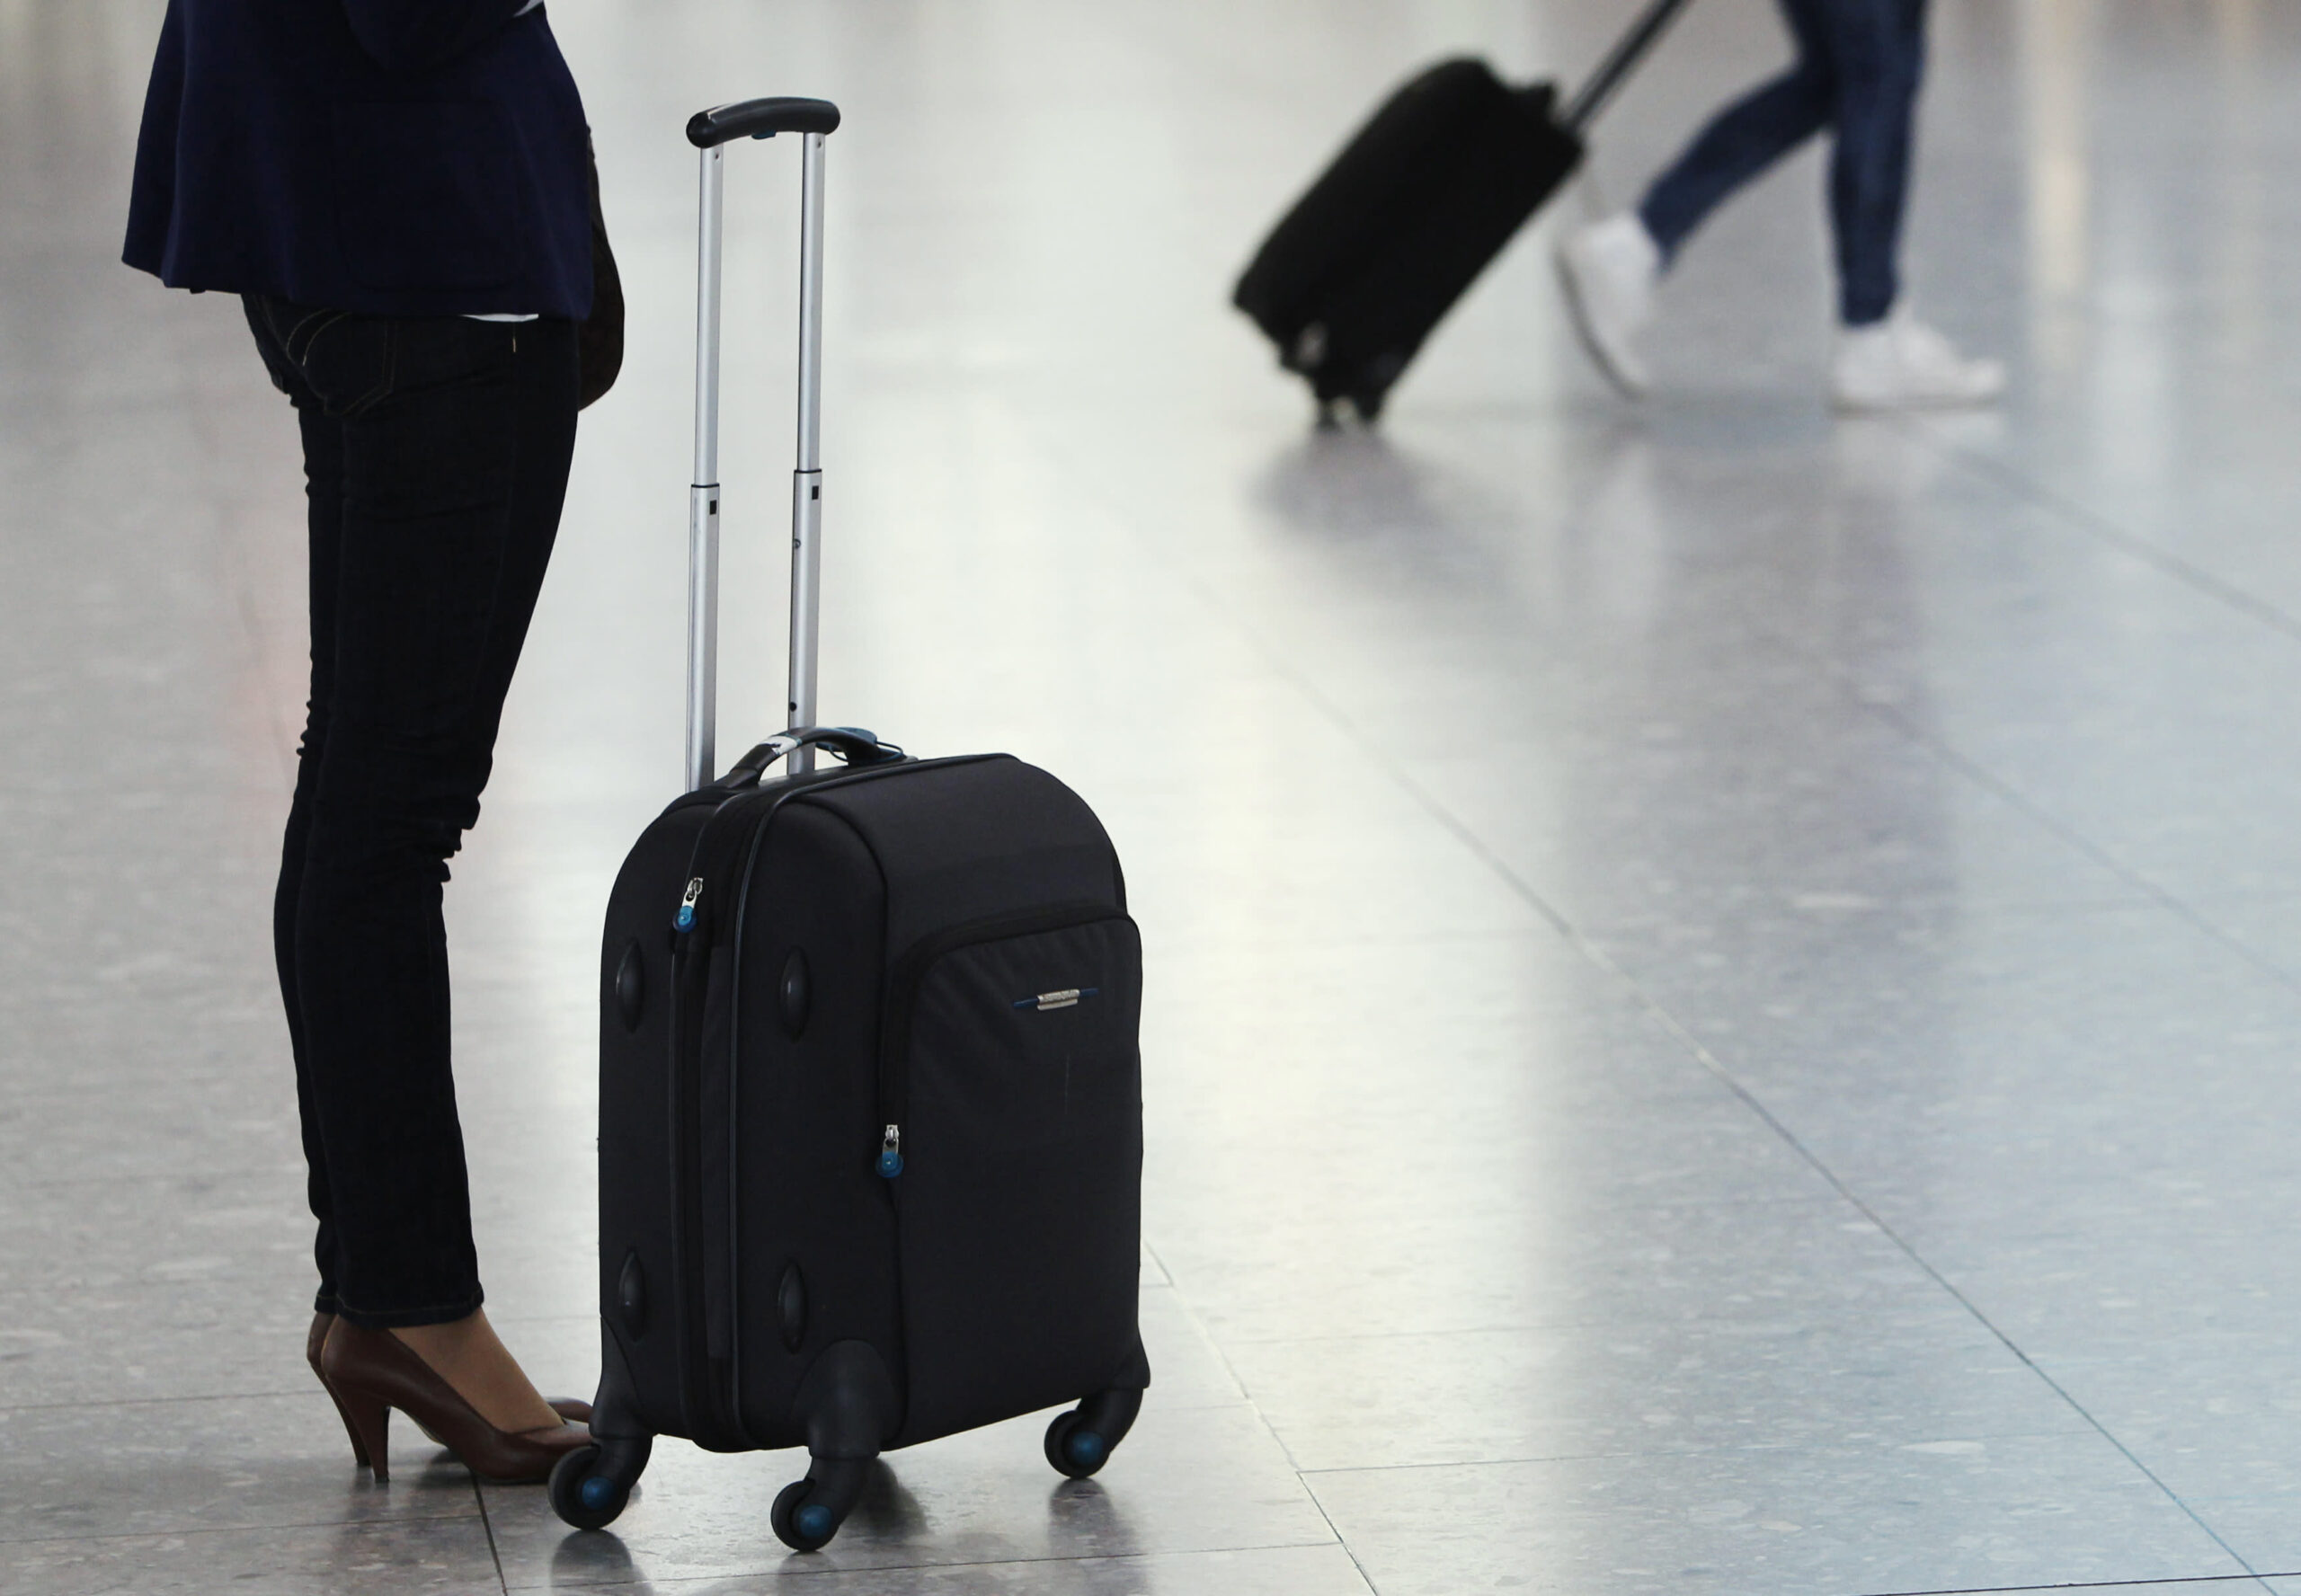 The cost of business travel is expected to increase through 2023, says an industry report